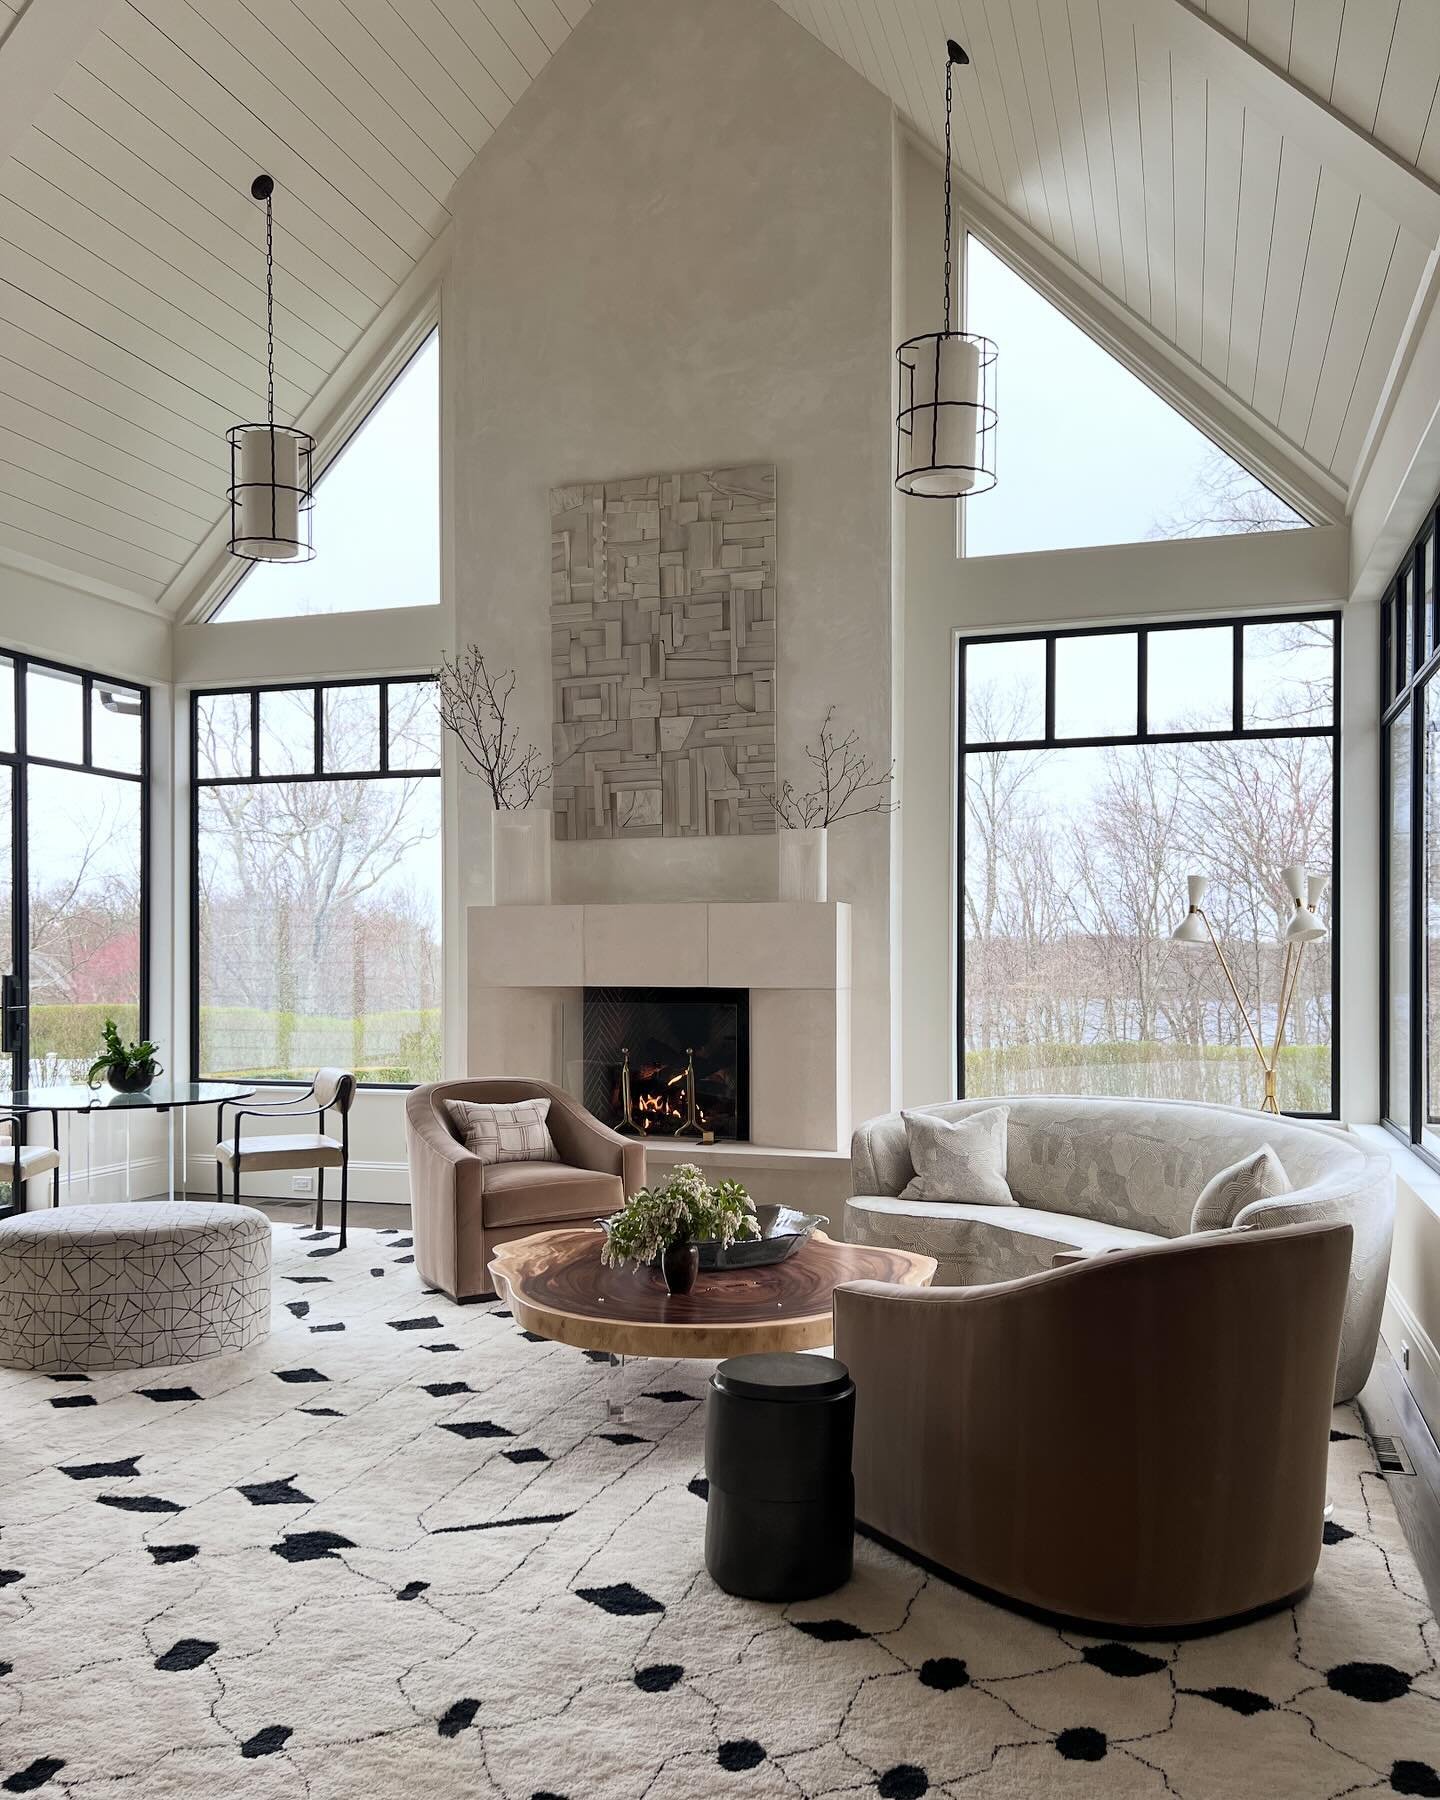 BEFORE &amp; AFTER 🪄🎩✨
Totally unique, unexpected, mellow, modern.  Neutral palette, zen in winter with bare trees and snow, is about to come alive as trees begin to green up.
#hilderbrandinteriors #classicmodern #classicinterior #newcanaanct